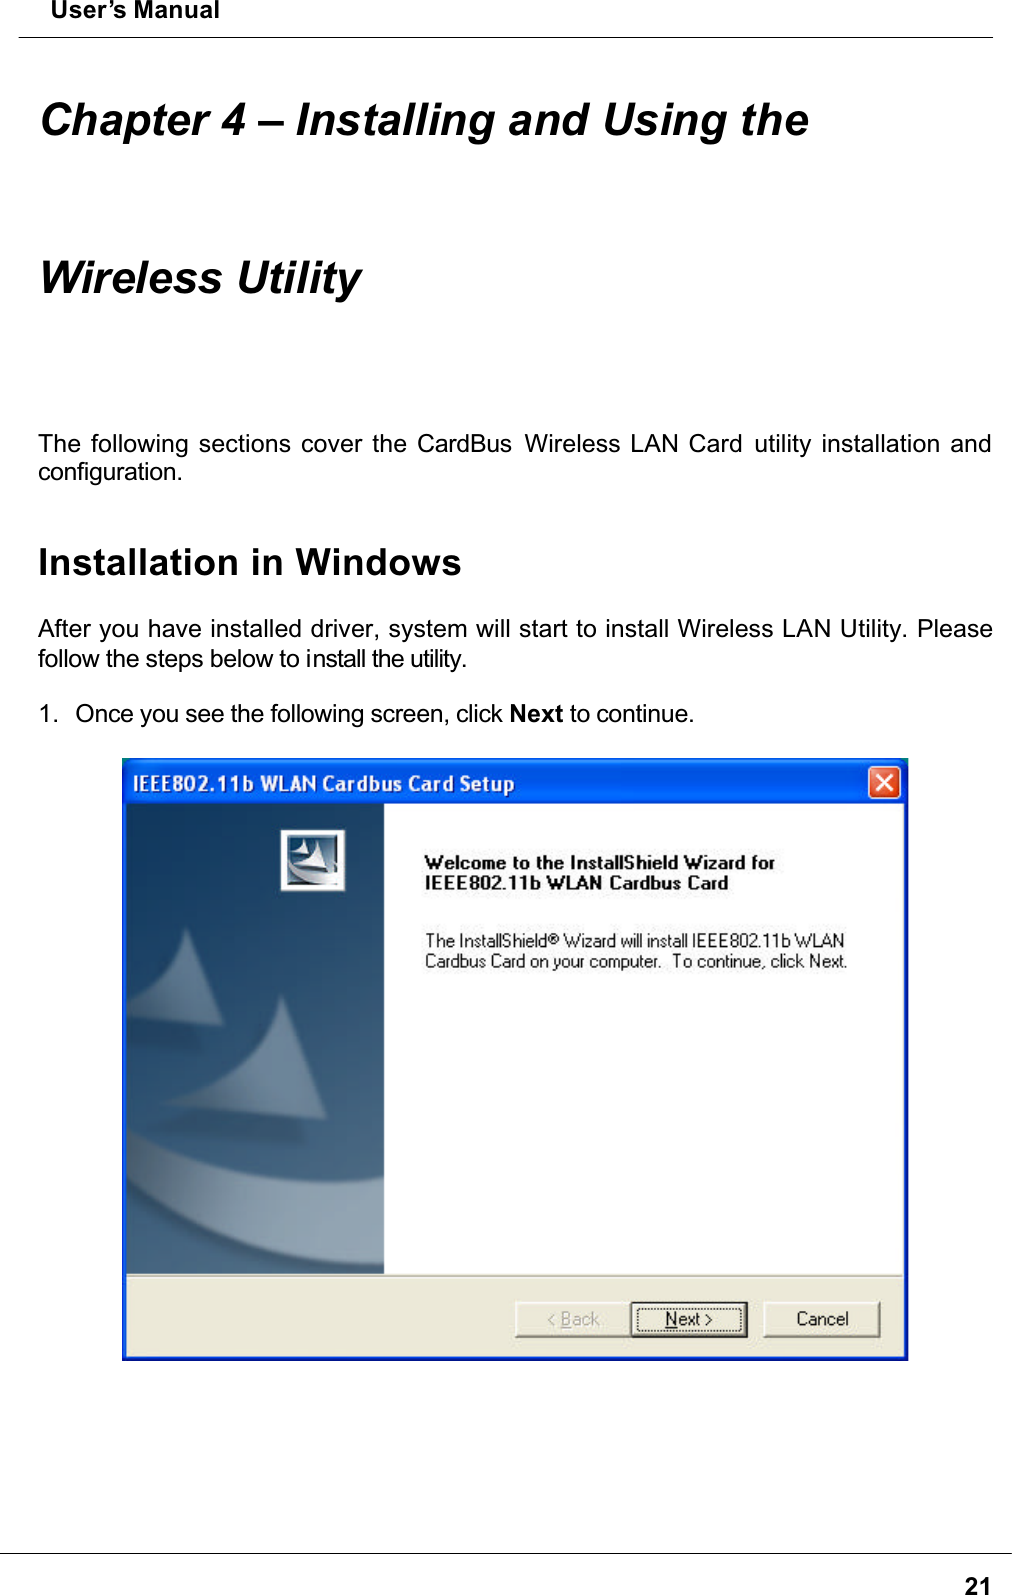  User’s Manual21Chapter 4 – Installing and Using theWireless UtilityThe following sections cover the CardBus  Wireless LAN Card utility installation and configuration.Installation in WindowsAfter you have installed driver, system will start to install Wireless LAN Utility. Please follow the steps below to install the utility.1. Once you see the following screen, click Next to continue.